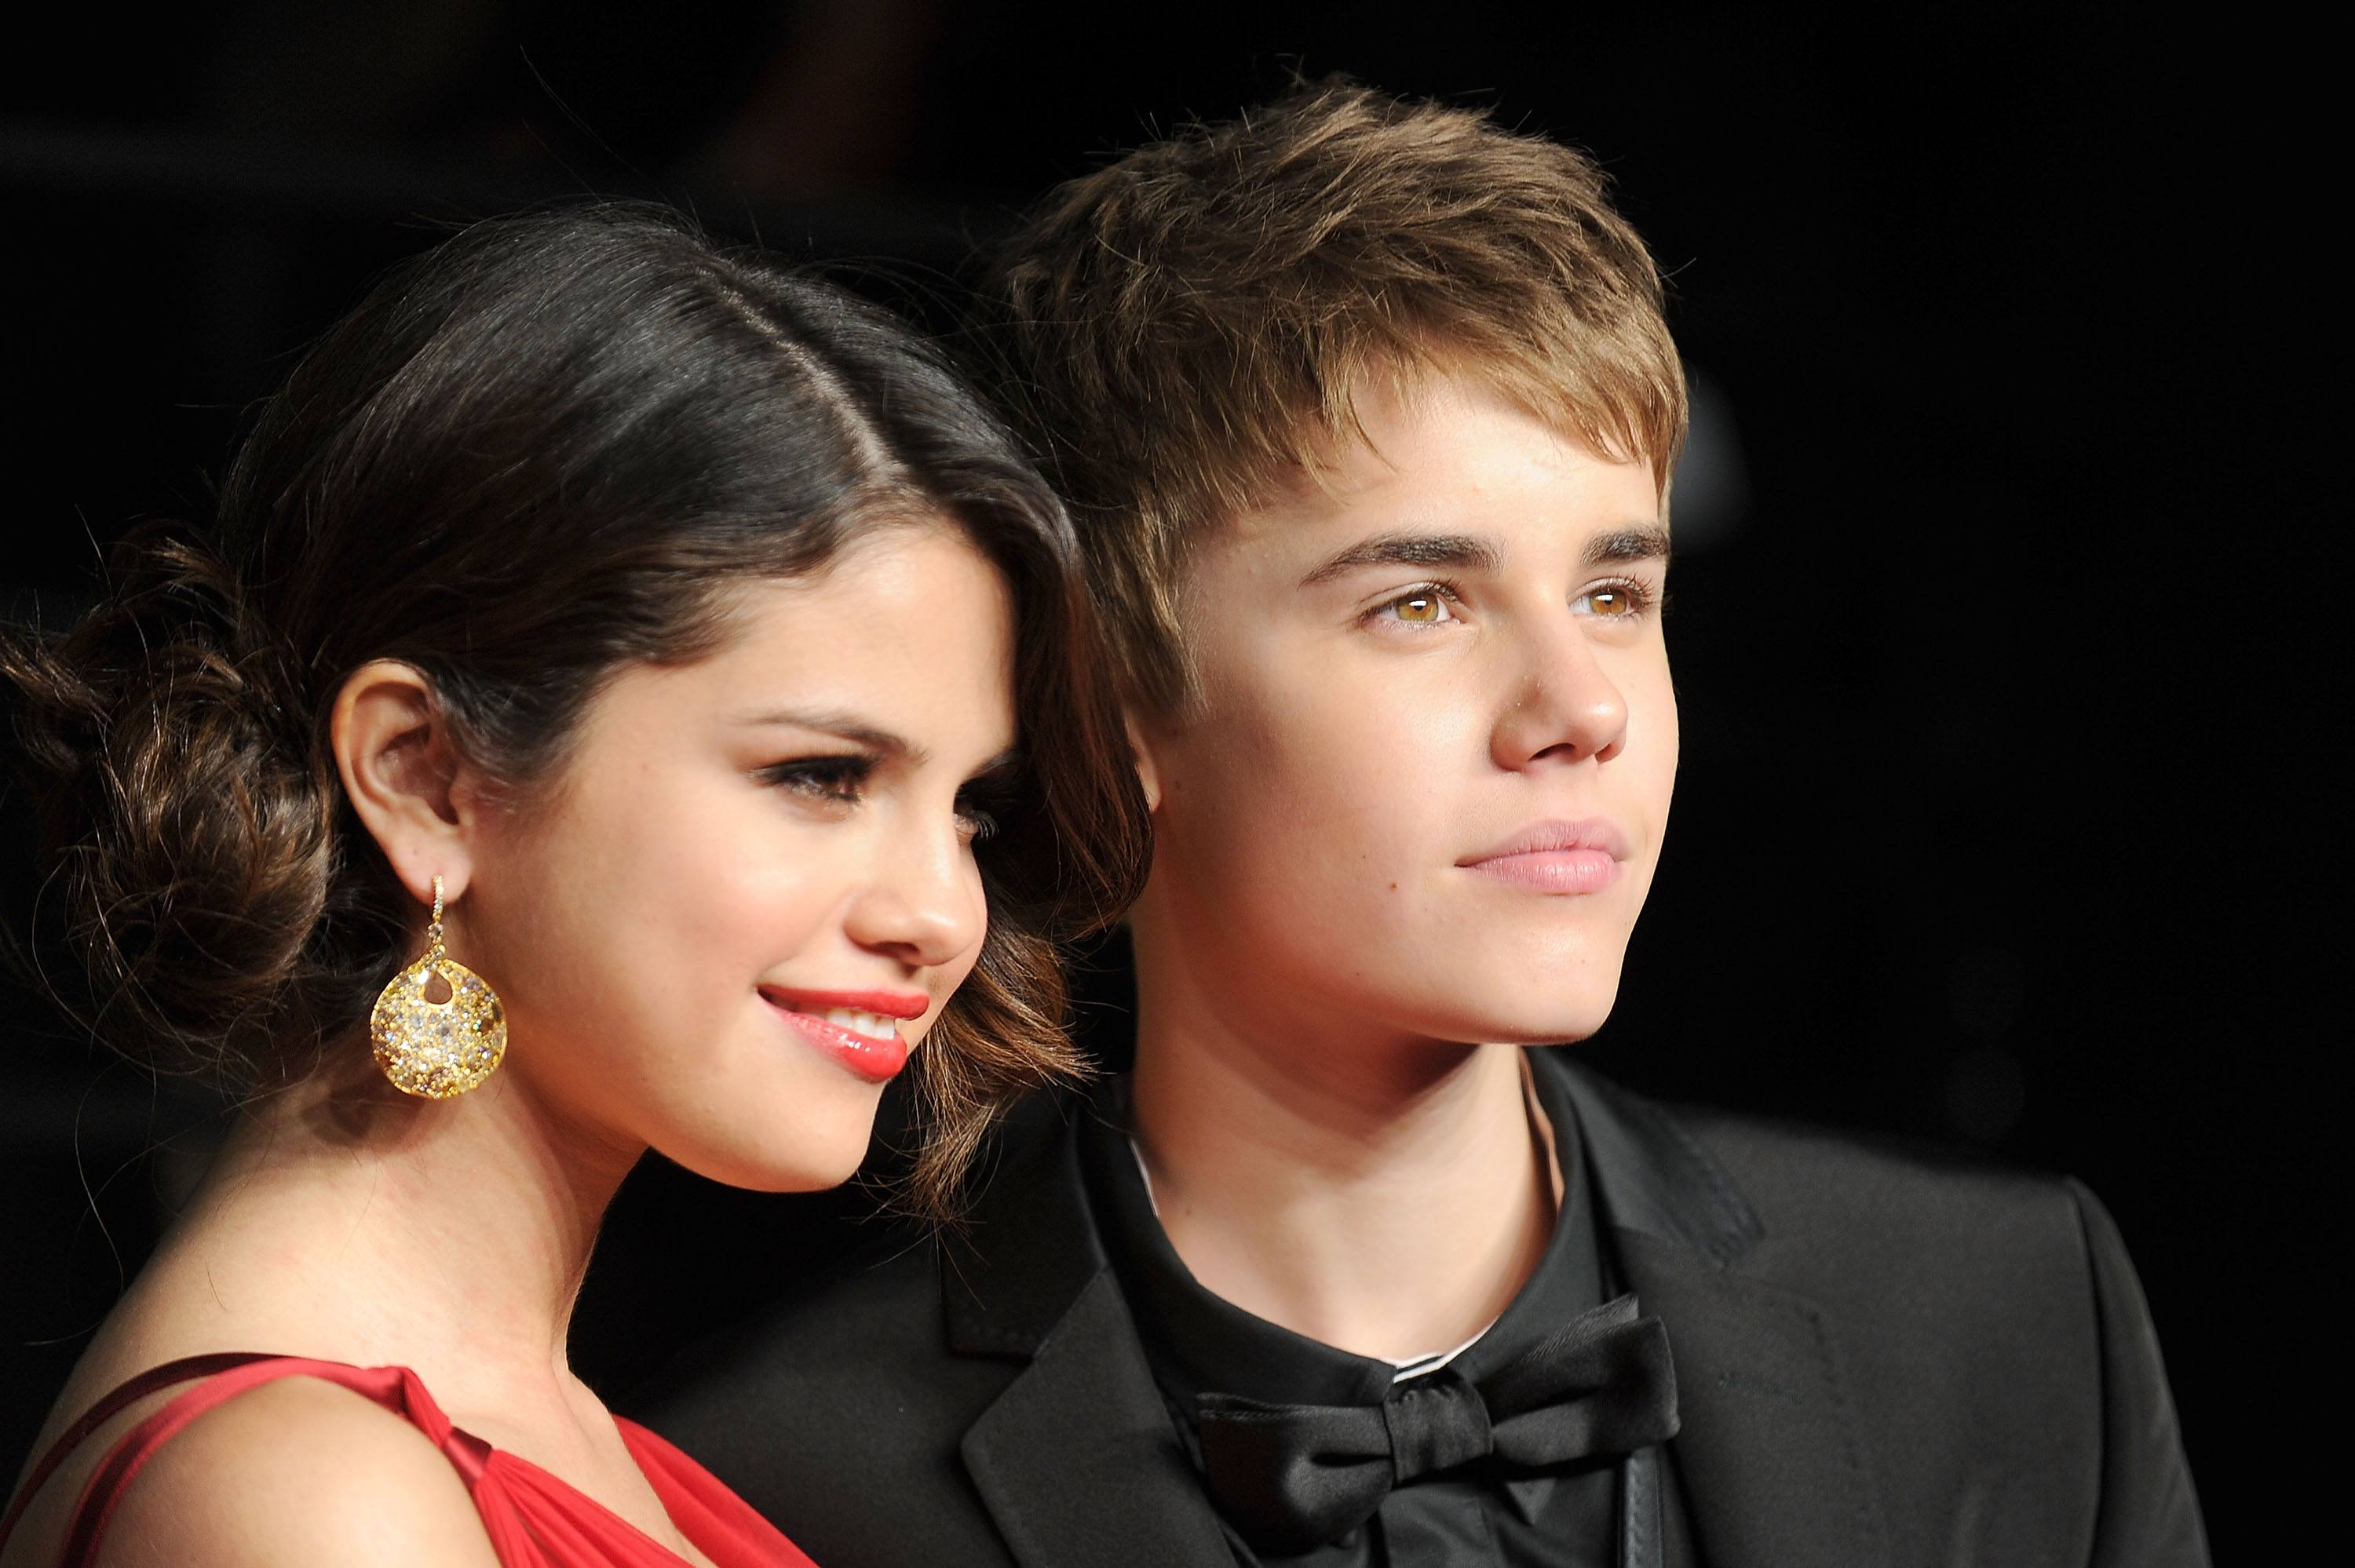 Selena Gomez and Justin Bieber arrive at the Vanity Fair Oscar party in California.